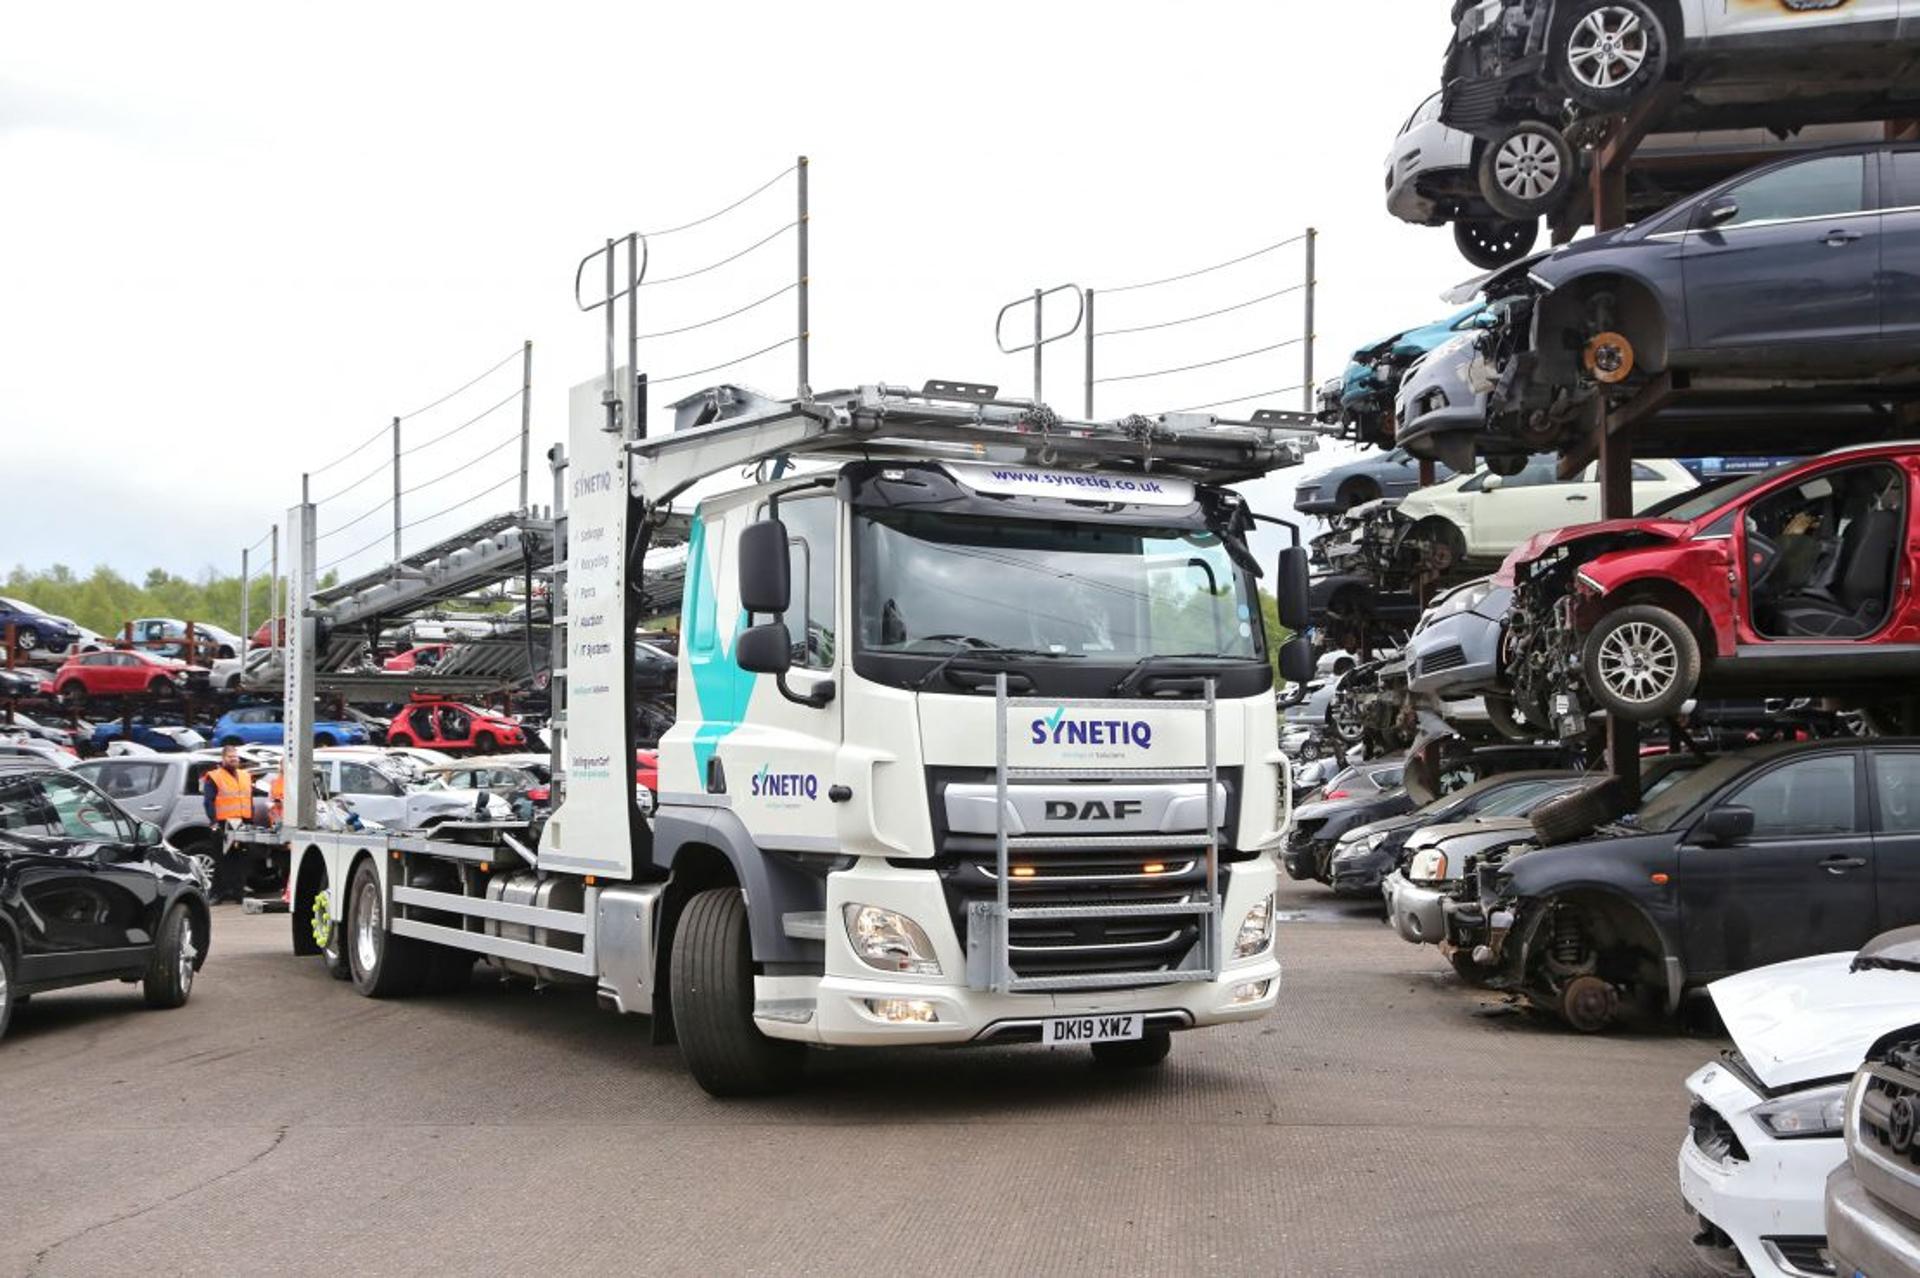 Doncaster vehicle salvage and dismantling firm acquired by US group at 1.46x revenue